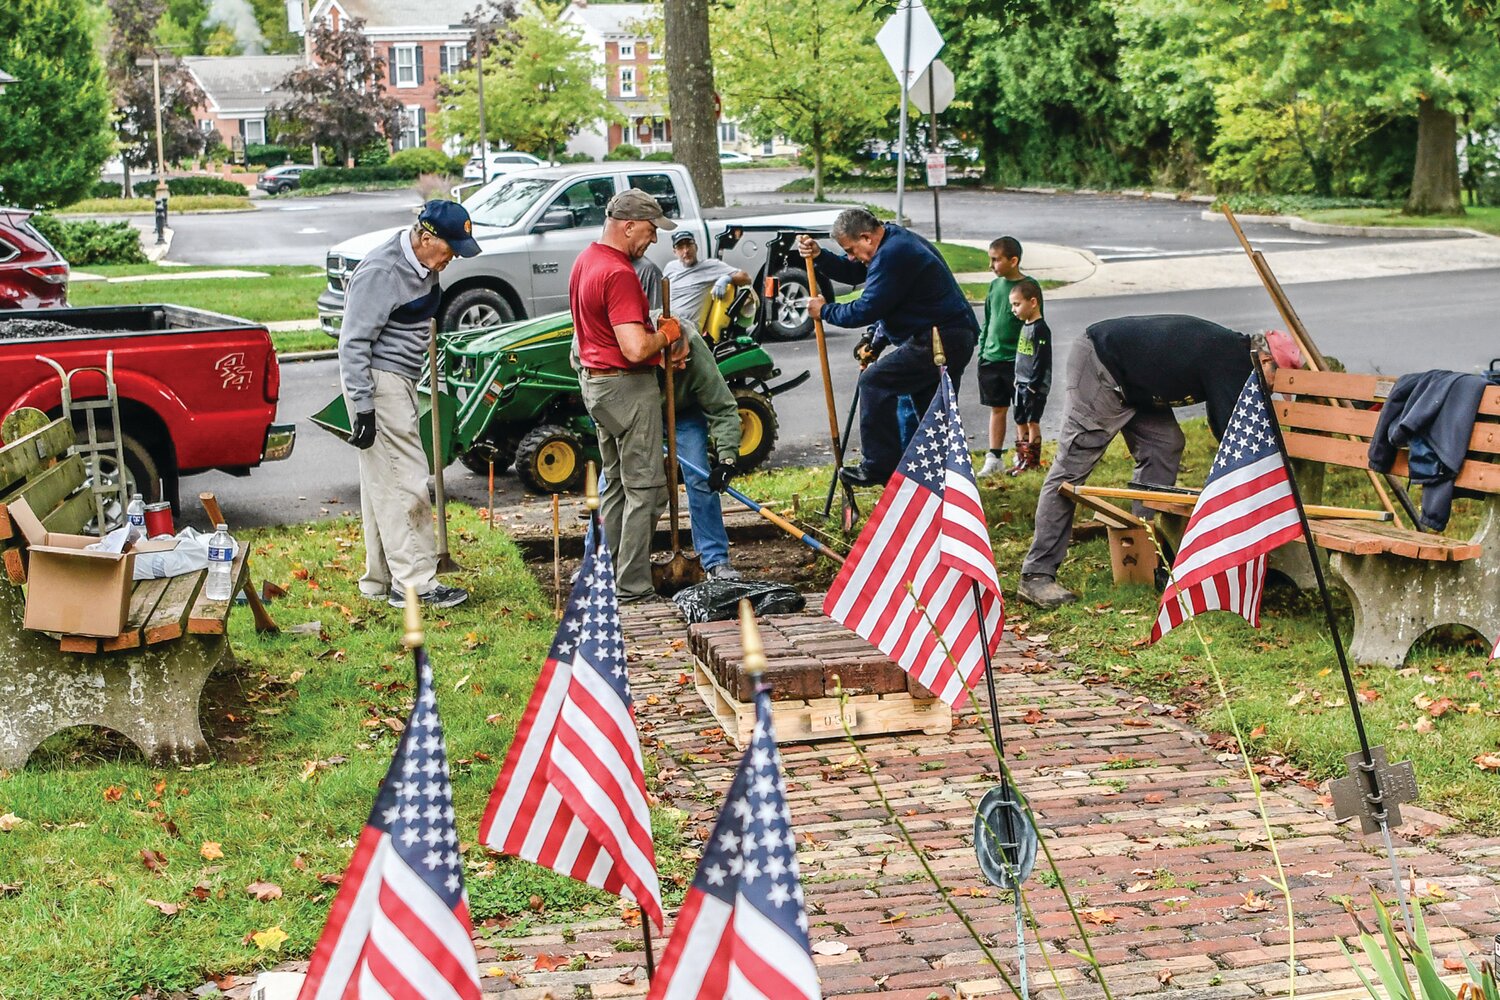 Doylestown American Legion Post 210 is creating a Veterans Path of Honor. Contact the Post if you are interested in having a brick placed on the path.